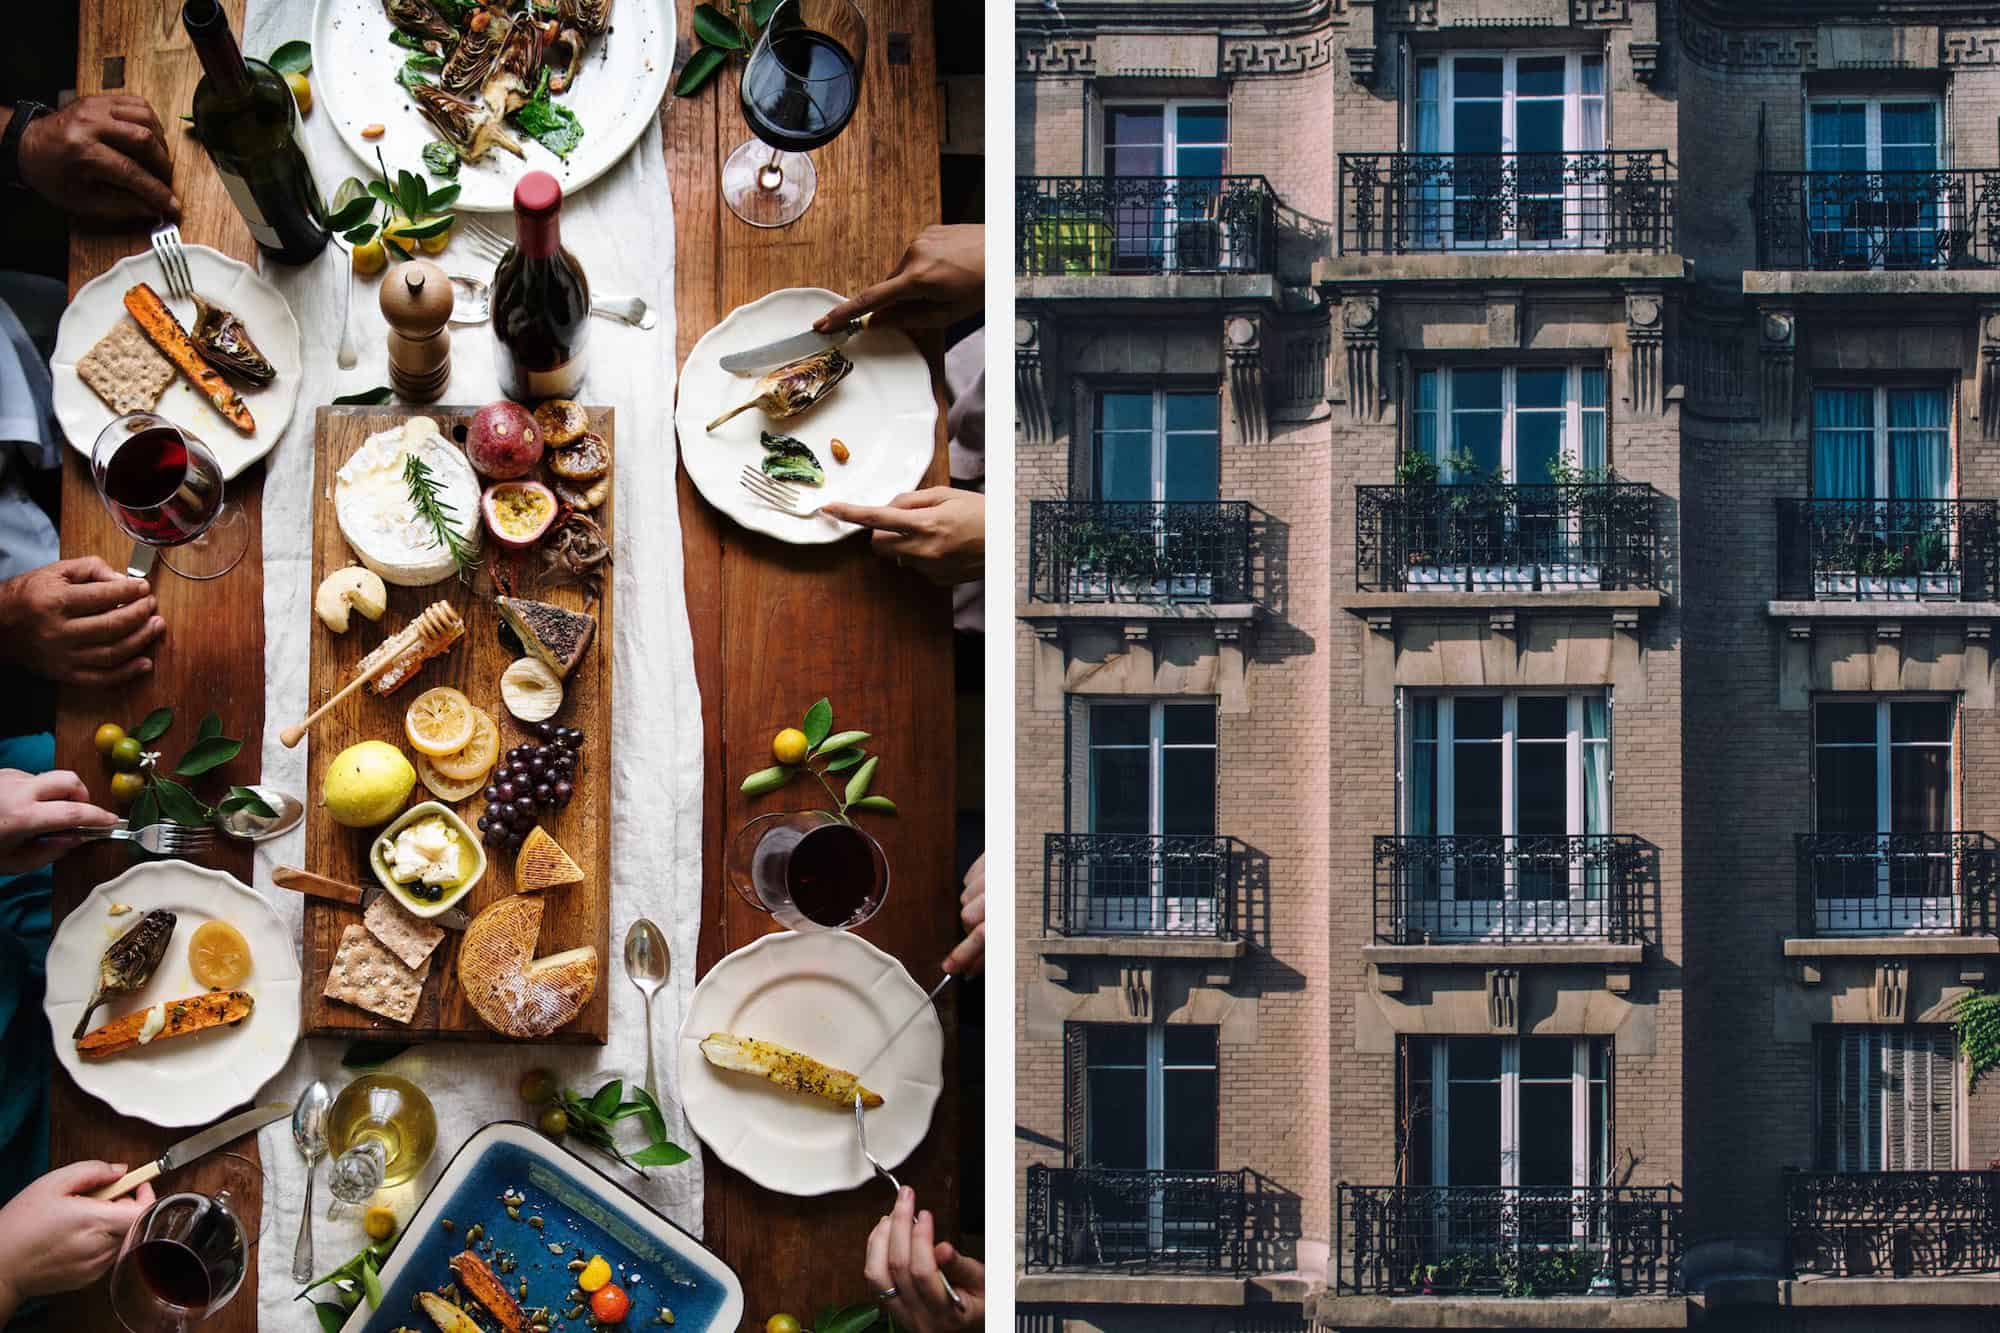 Eating with locals in Paris often involves cheese and wine (left). Enjoying a home-cooked meal at a Parisian's apartment gives you a glimpse of what's behind those beautiful building facades (right).